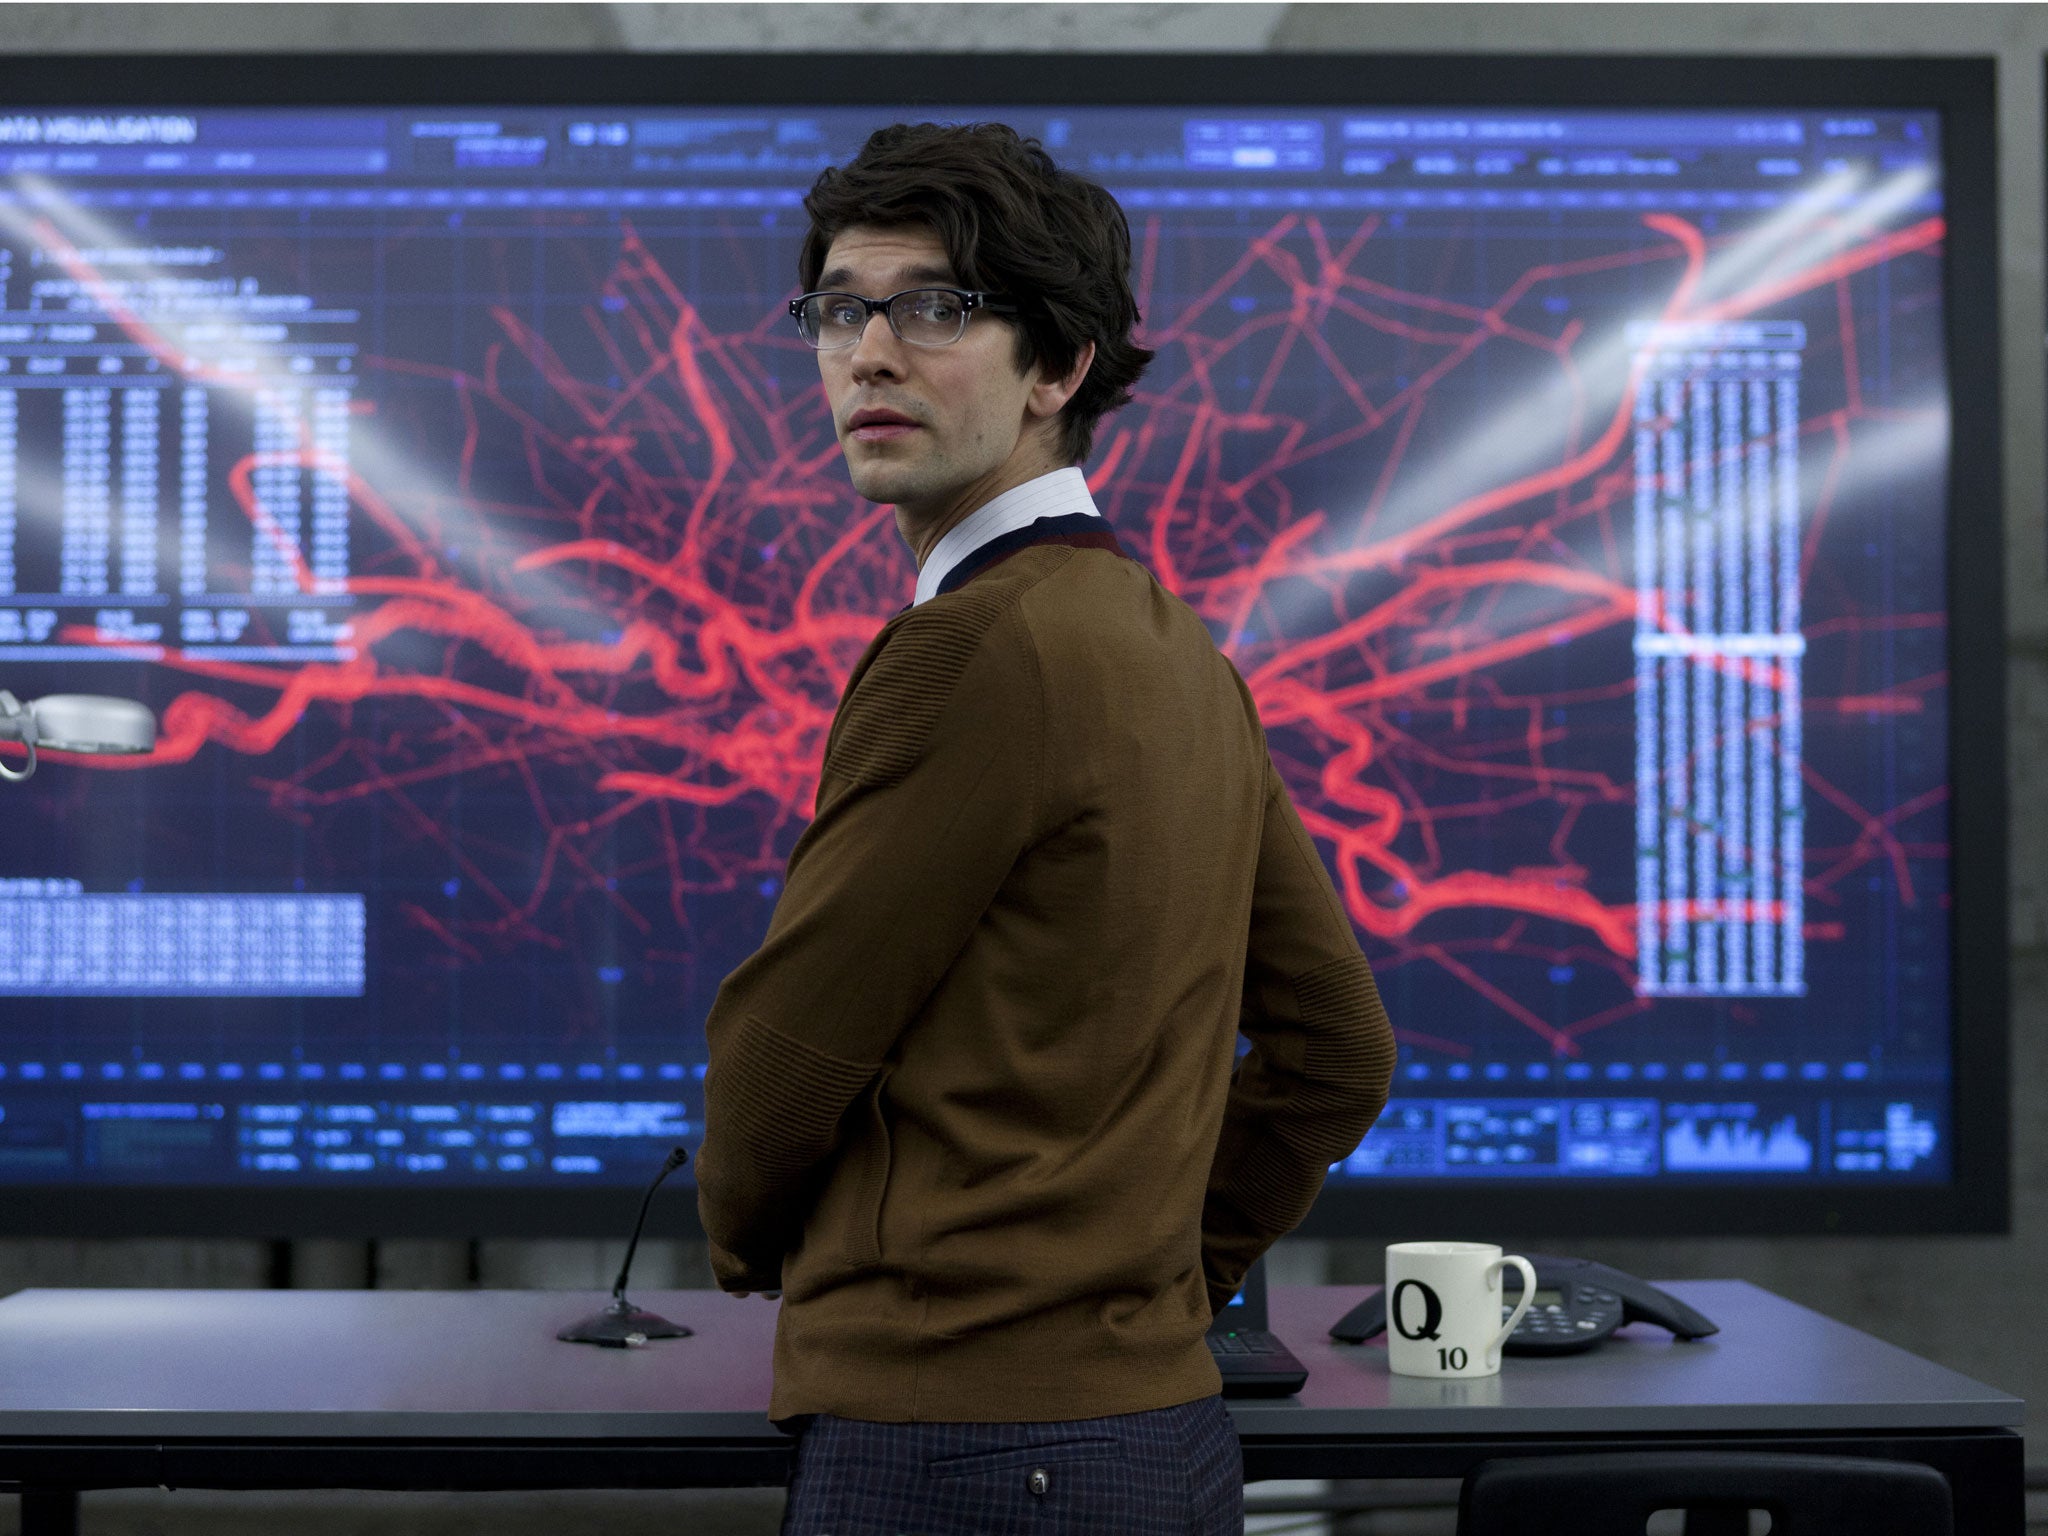 Ben Whishaw as the spy boffin Q in the Bond film ‘Skyfall’